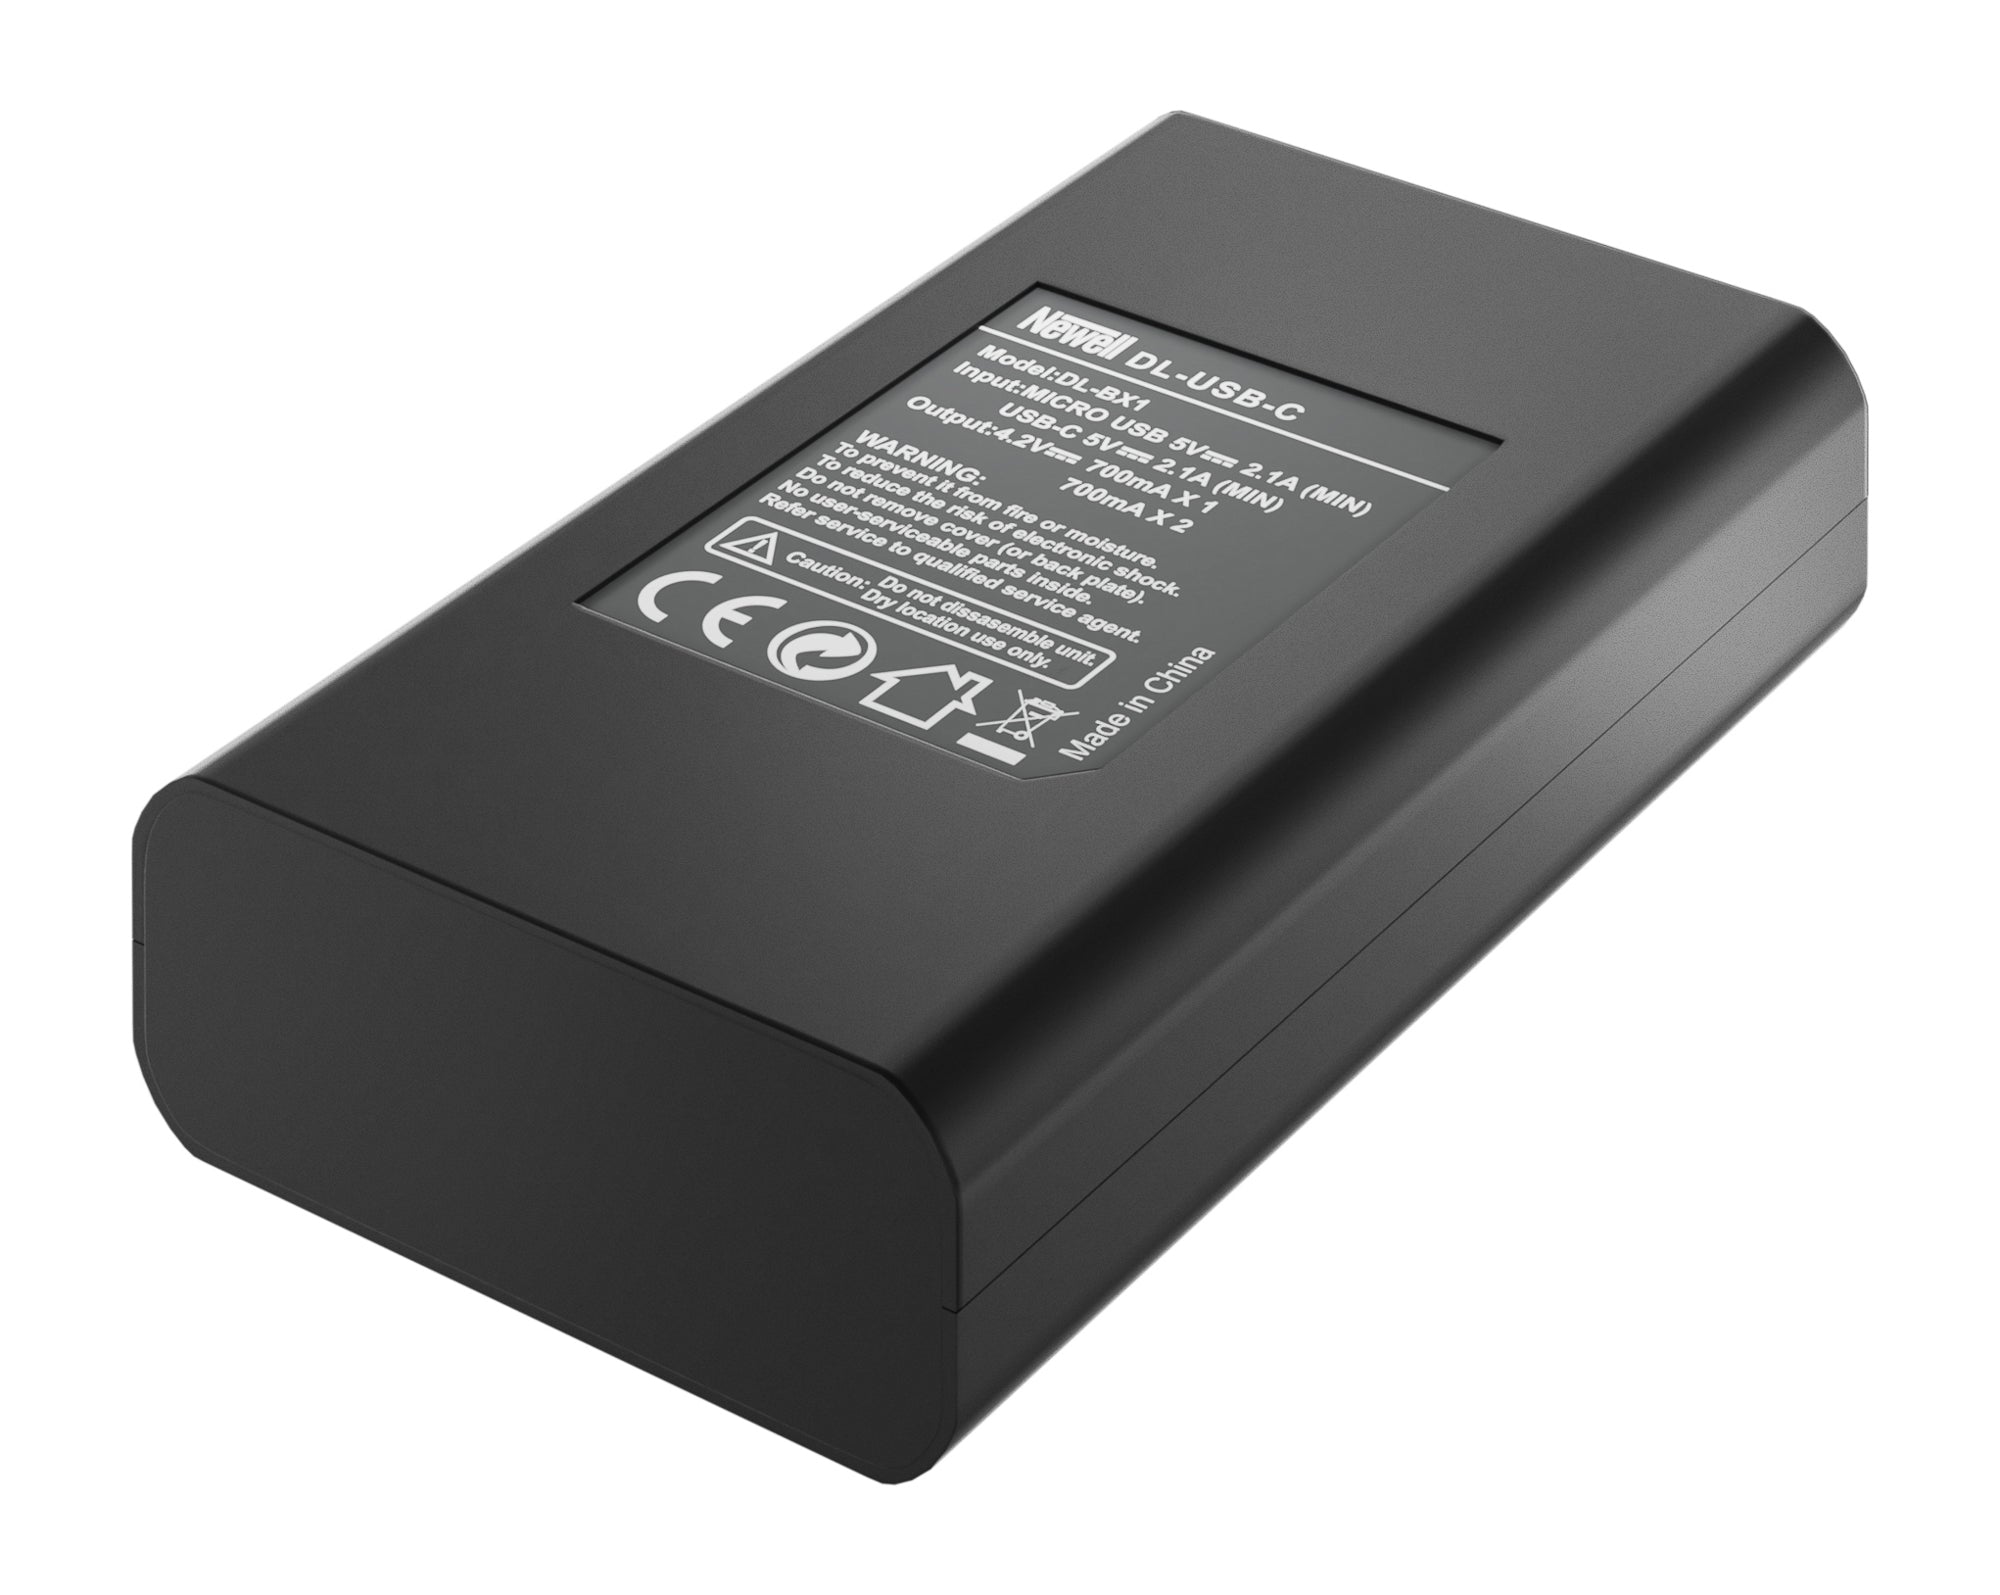 Newell DL-USB-C charger and 2x NP-BX1 batteries for Sony